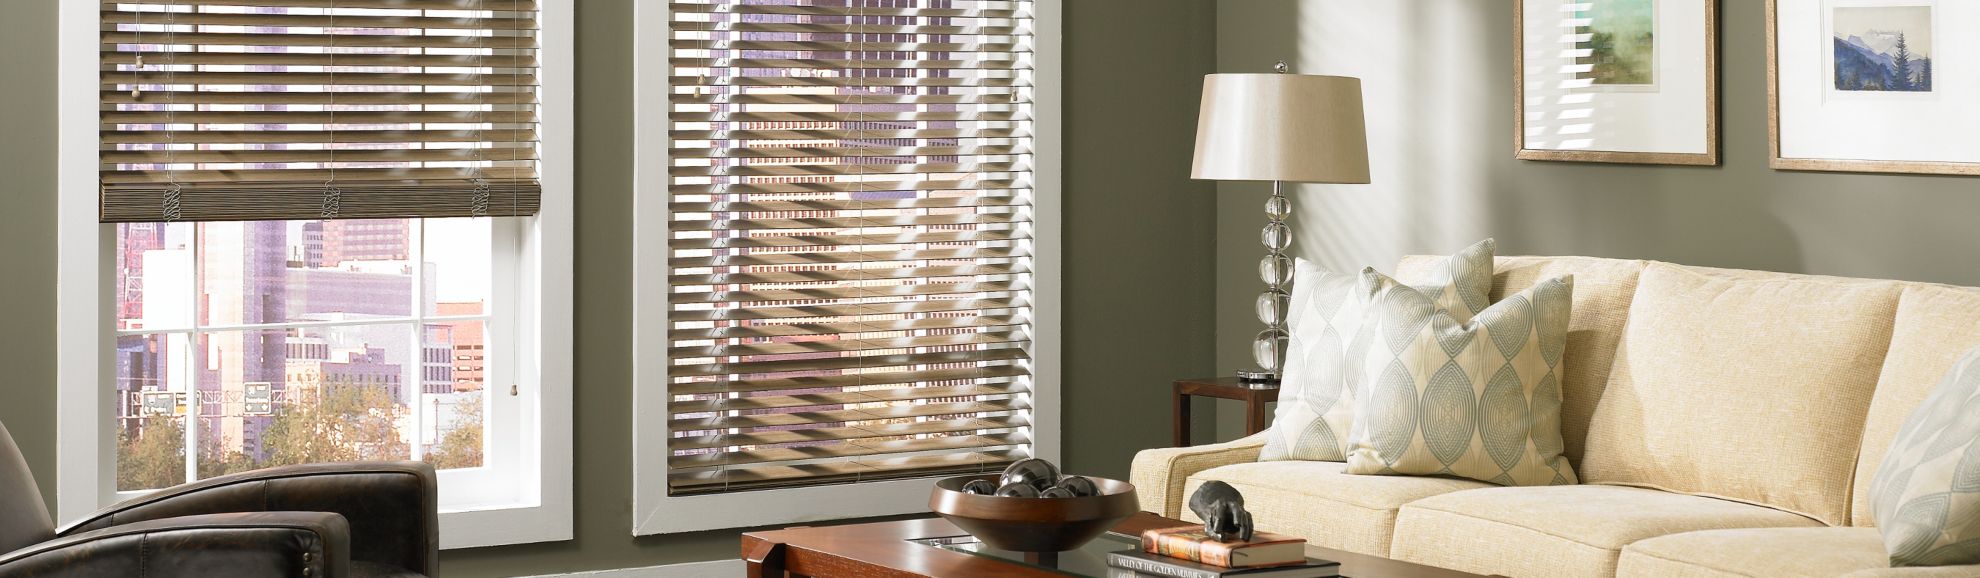 Wood Blinds - Mountain Ash 634 - Living Room